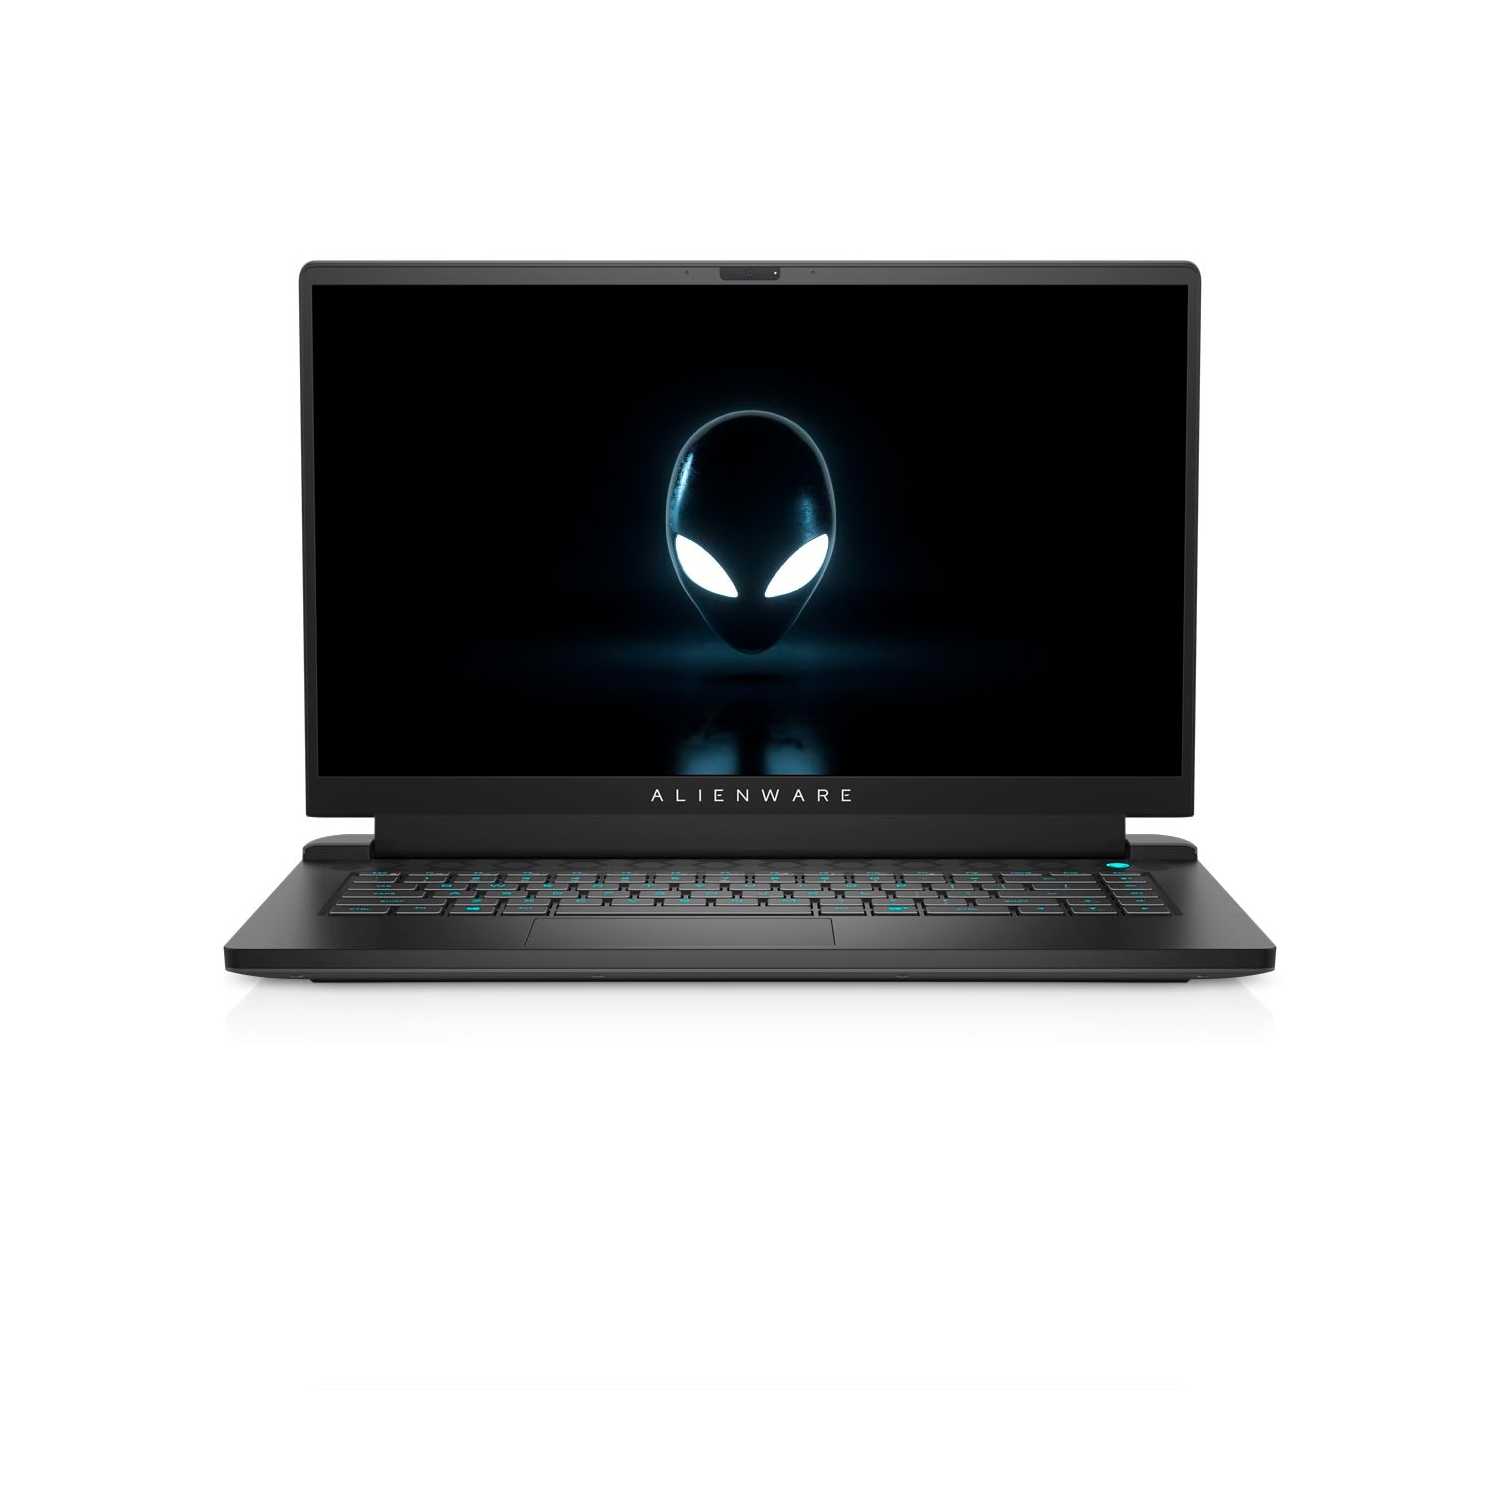 Refurbished (Excellent) - Dell Alienware m15 R5 Ryzen Edition Gaming Laptop (2021), 15.6" FHD, Core Ryzen 7, 1TB SSD, 16GB RAM, RTX 3070, 8 Cores @ 4.6 GHz Certified